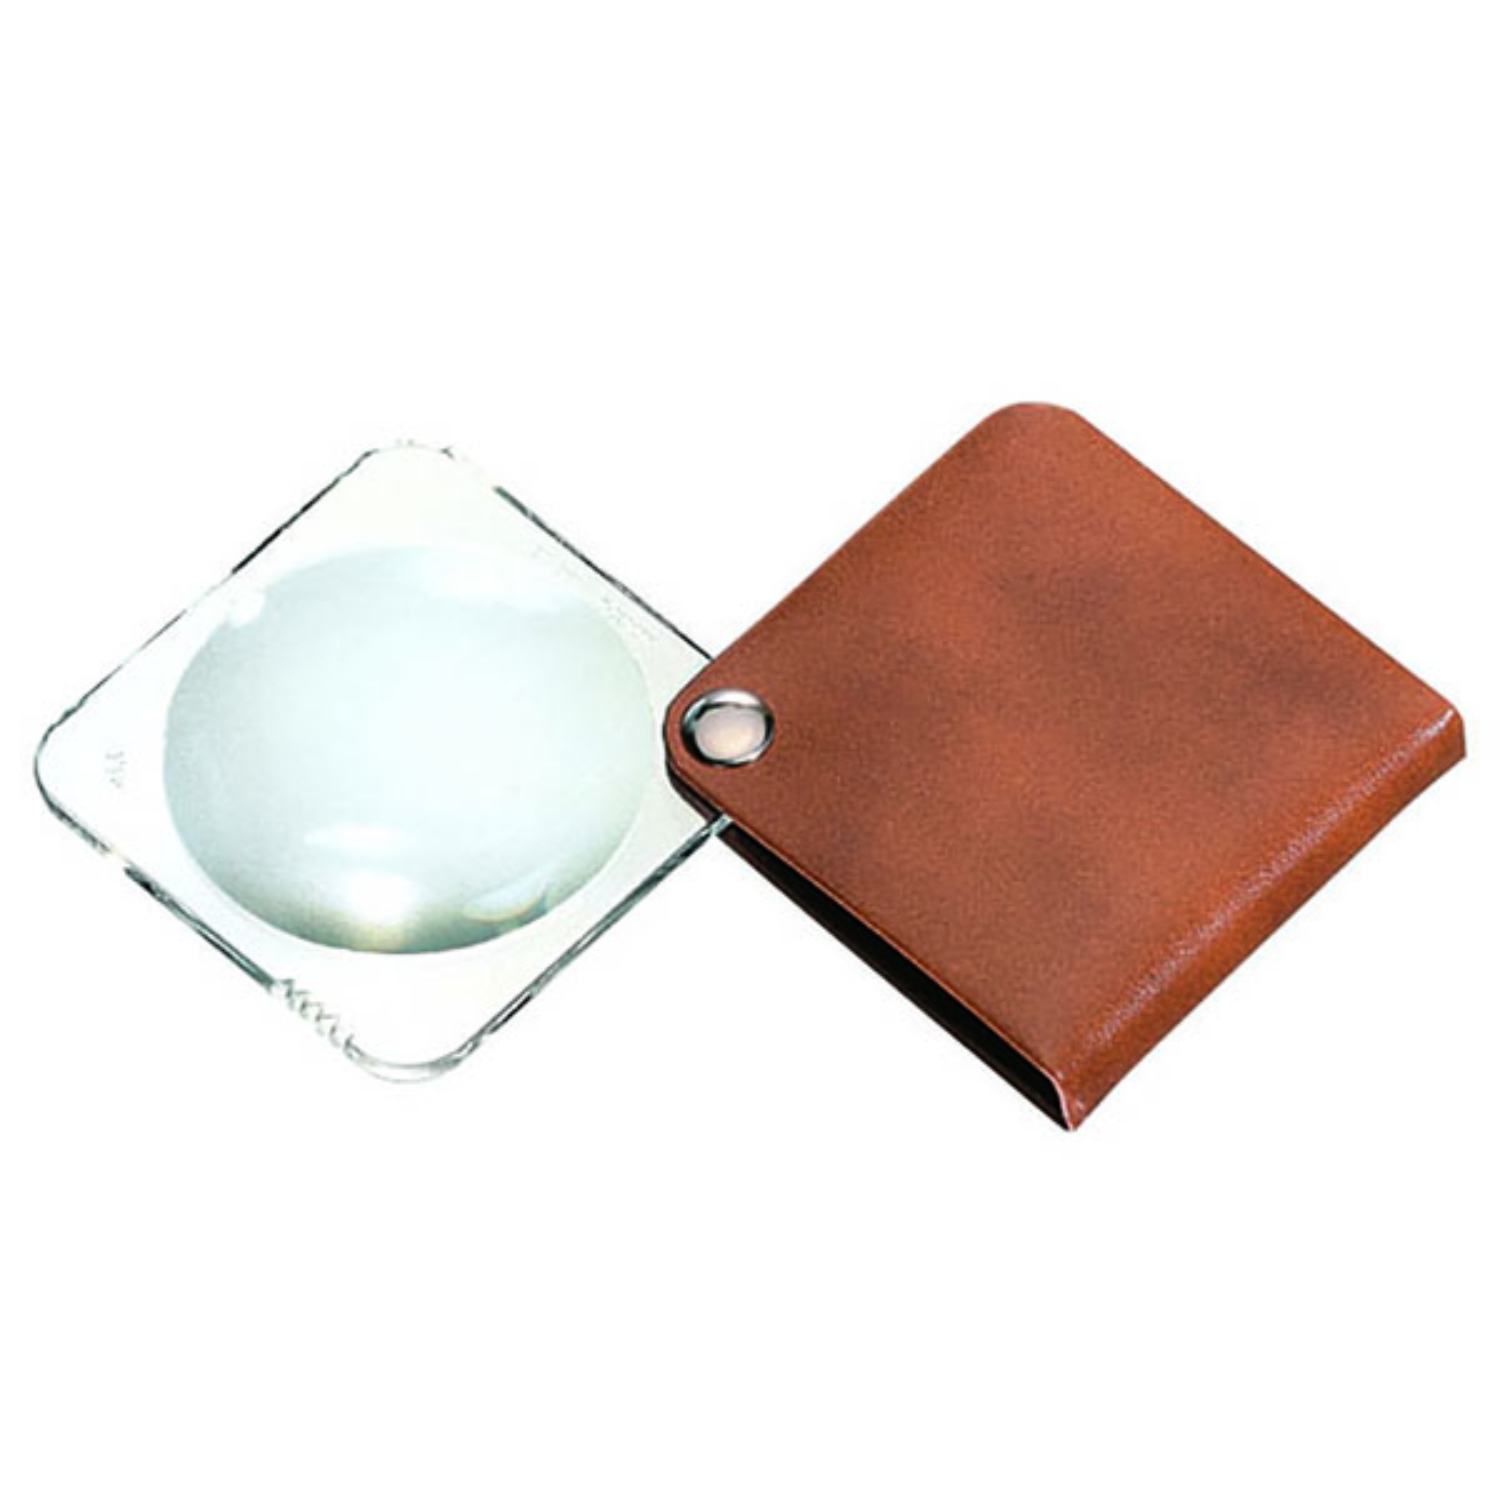 Image of tan classic square folding pocket magnifier from Eschenbach Optik